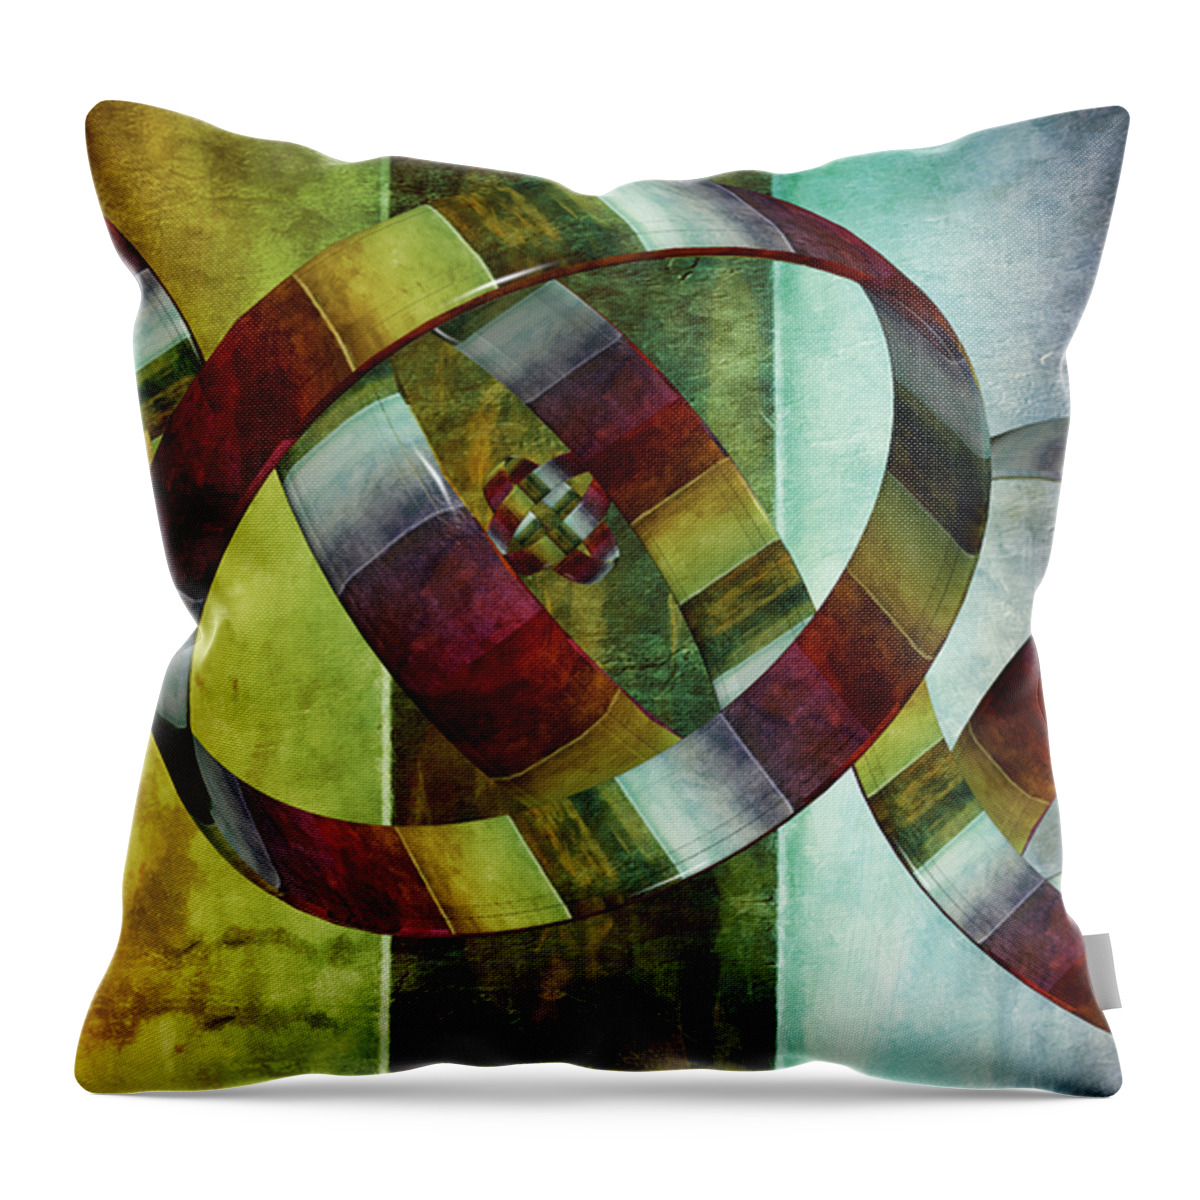 Abstract Throw Pillow featuring the digital art 5 Wind Rings by Angelina Tamez